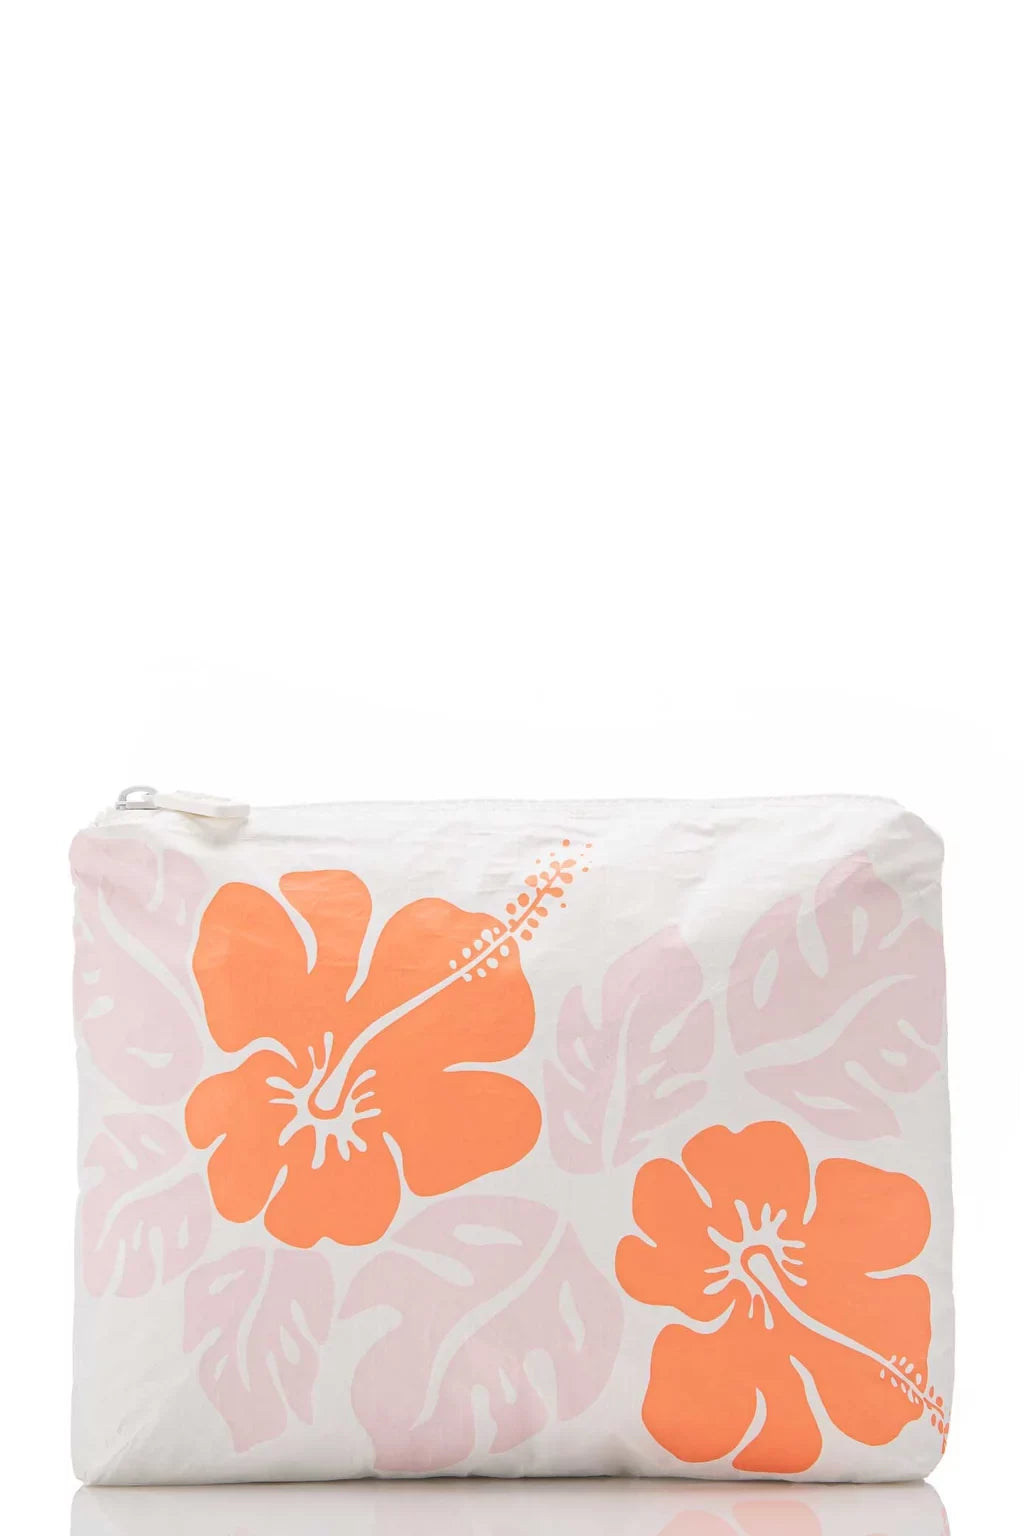 Big Island Hibiscus Small Pouch Accessories Aloha   